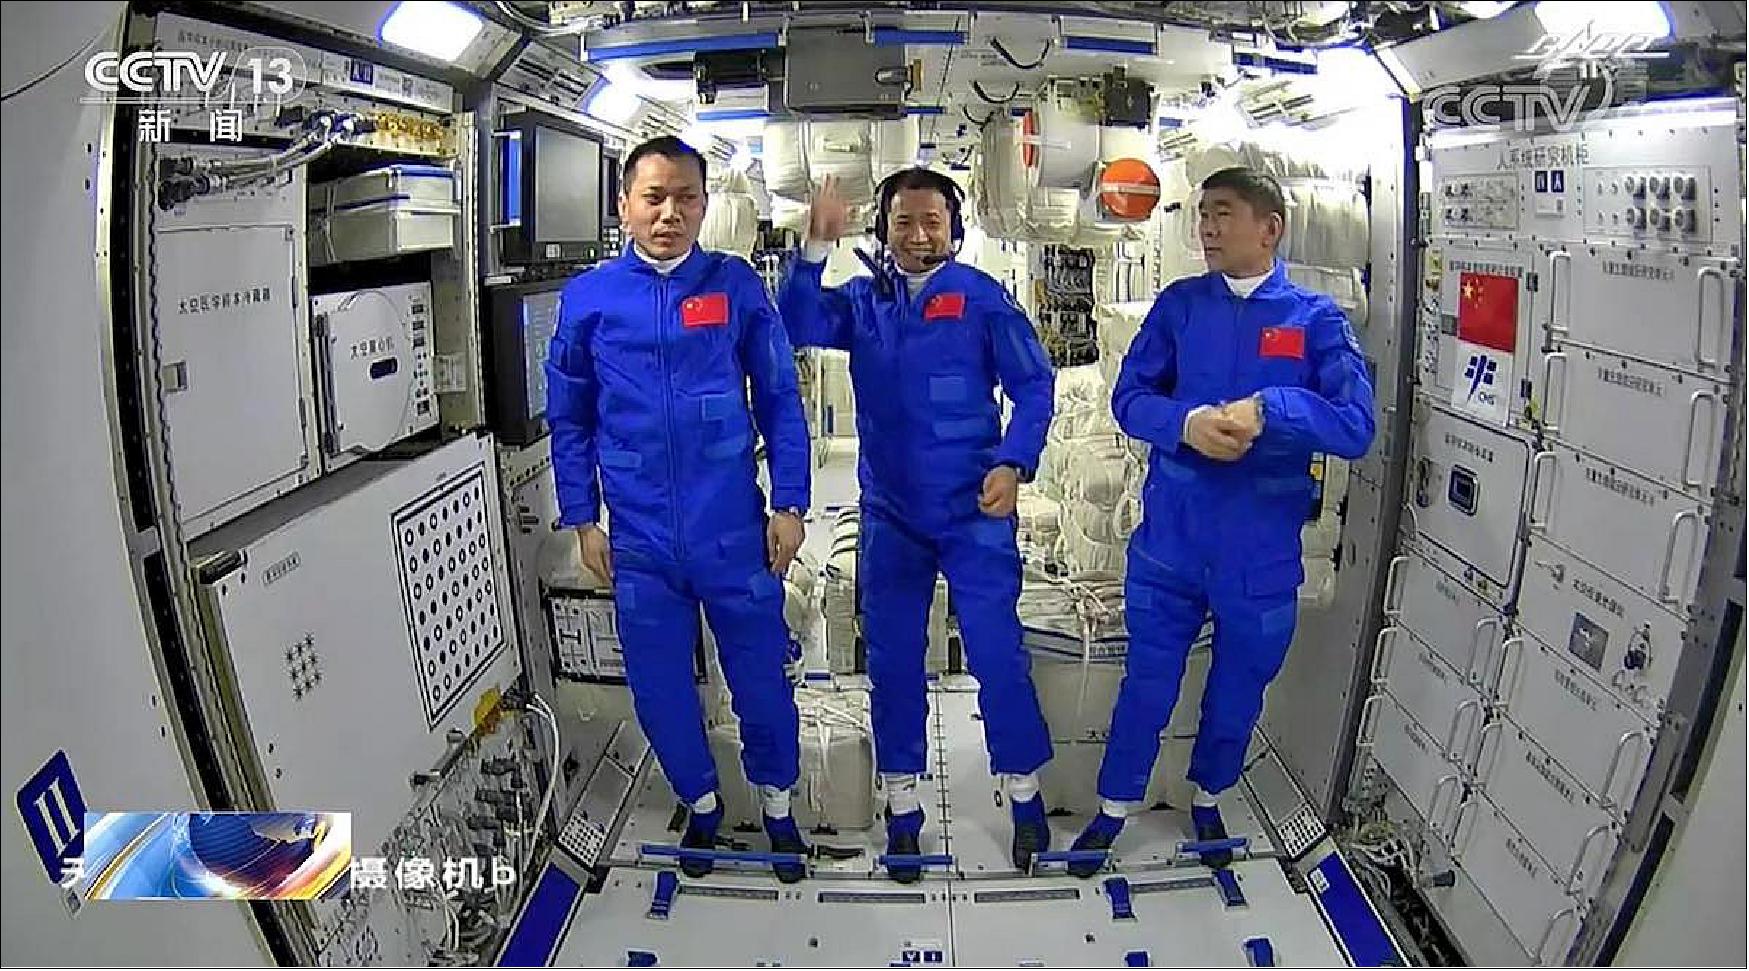 Figure 37: Chinese astronaut Tang Hongbo (left), commander Nie Haisheng (center), and astronaut Liu Boming (right) inside the Tianhe core module of China’s space station (image credit: CCTV)